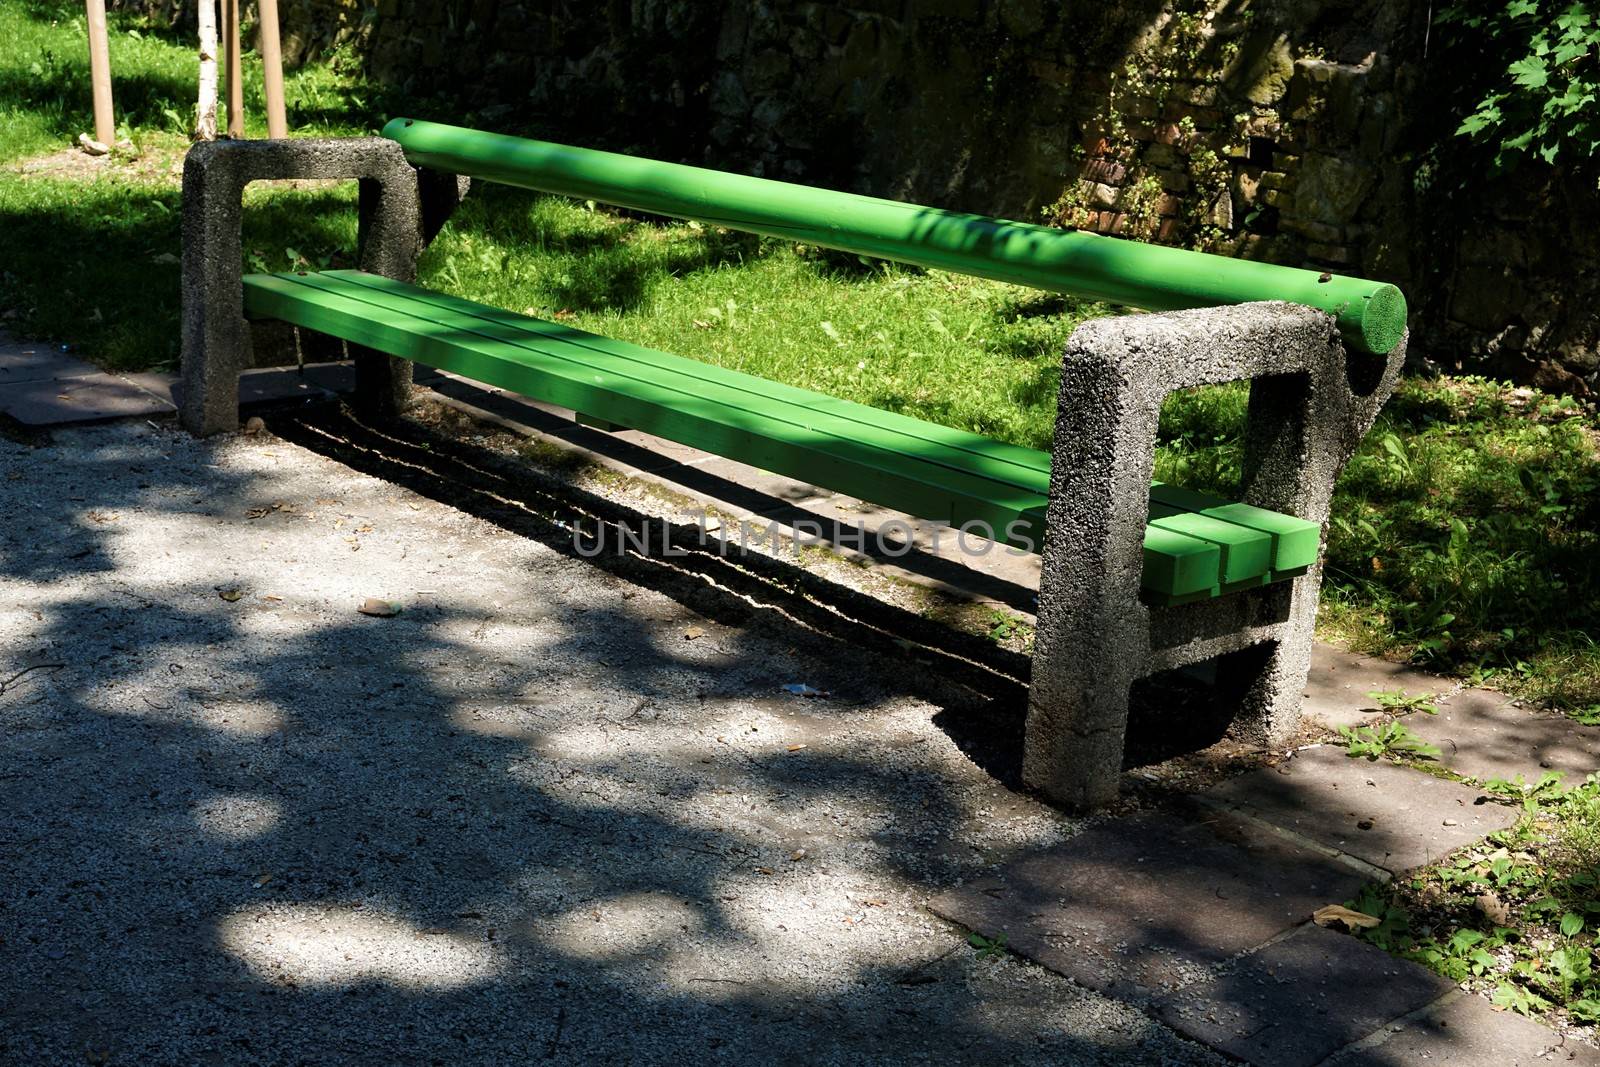 Ljubljana concrete bench from old Yugoslavian times by pisces2386